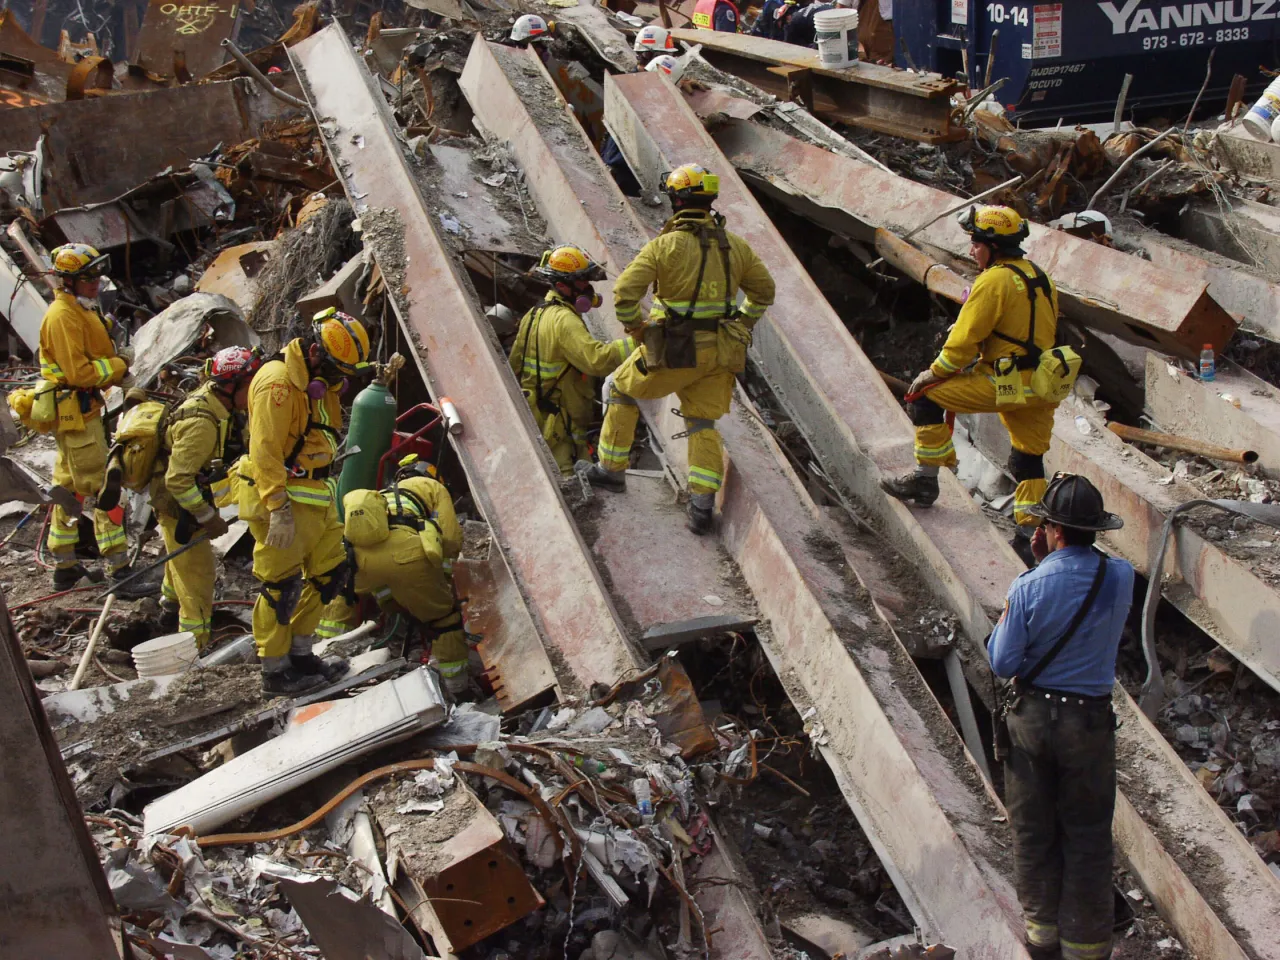 Image: 9/11 - New York City fire fighters continue to search for survivors at Ground Zero (2)